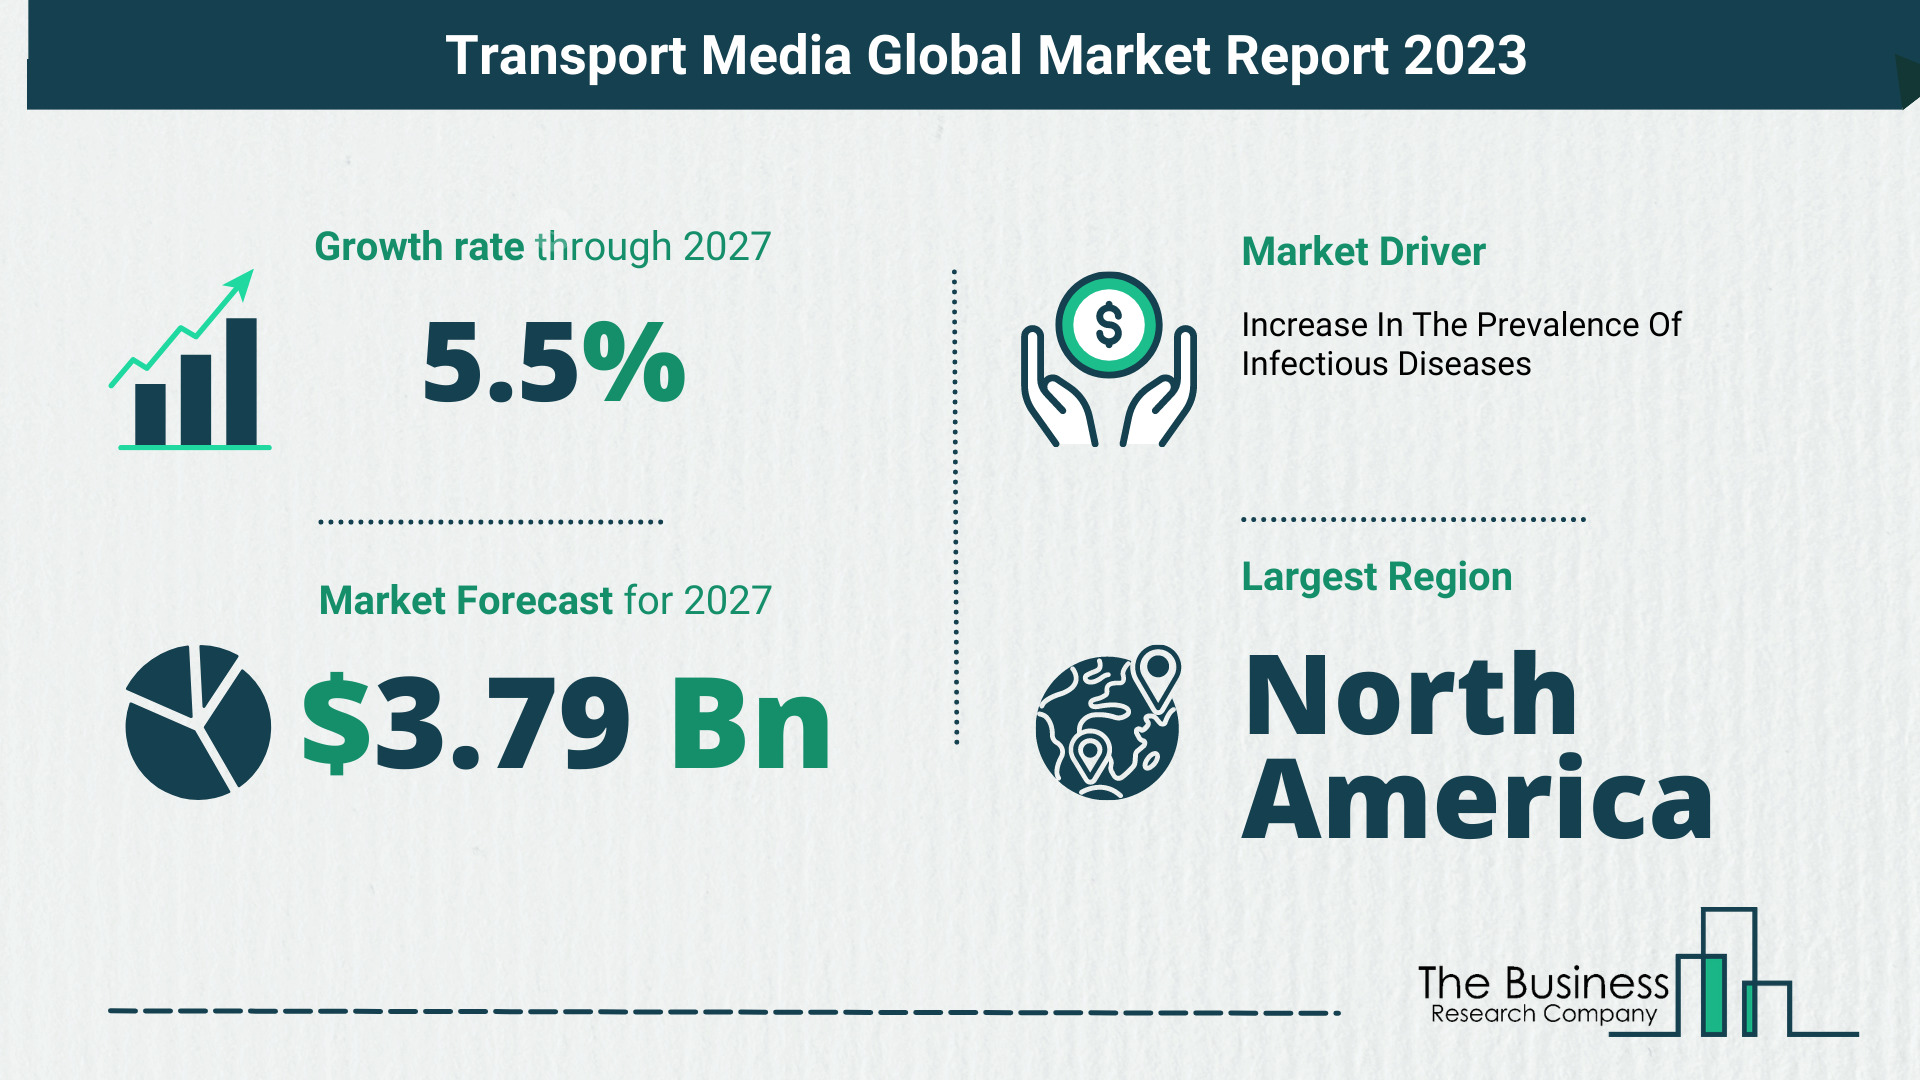 Global Transport Media Market Opportunities And Strategies 2023